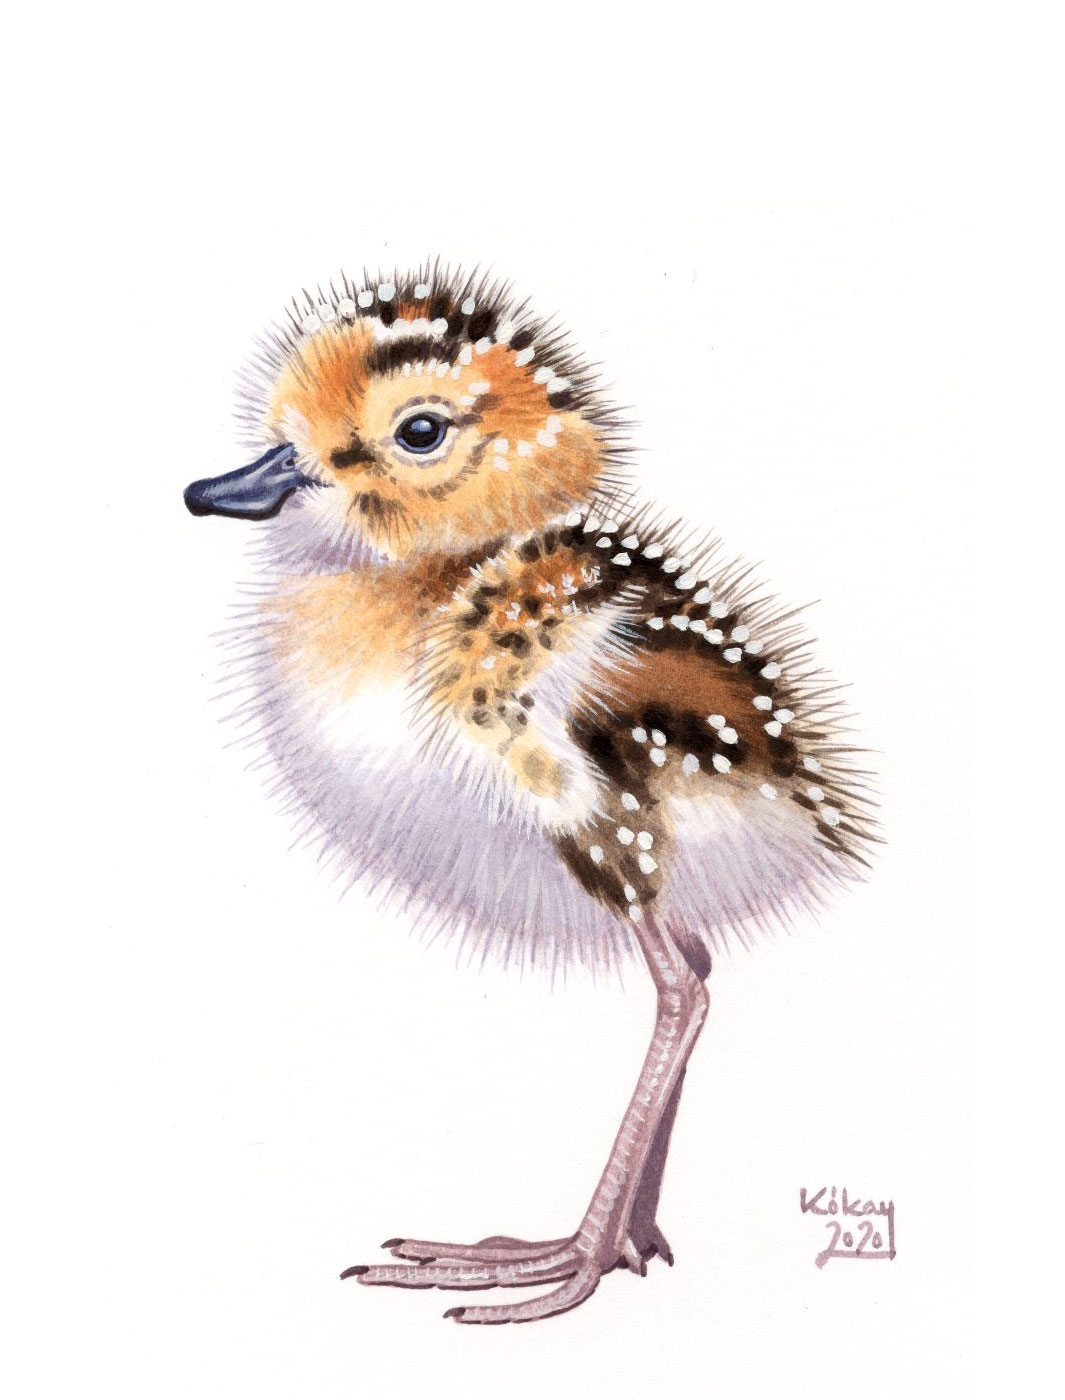 Spoon-billed Sandpiper chick (Calidris pygmeus), watercolour and bodycolour on paper